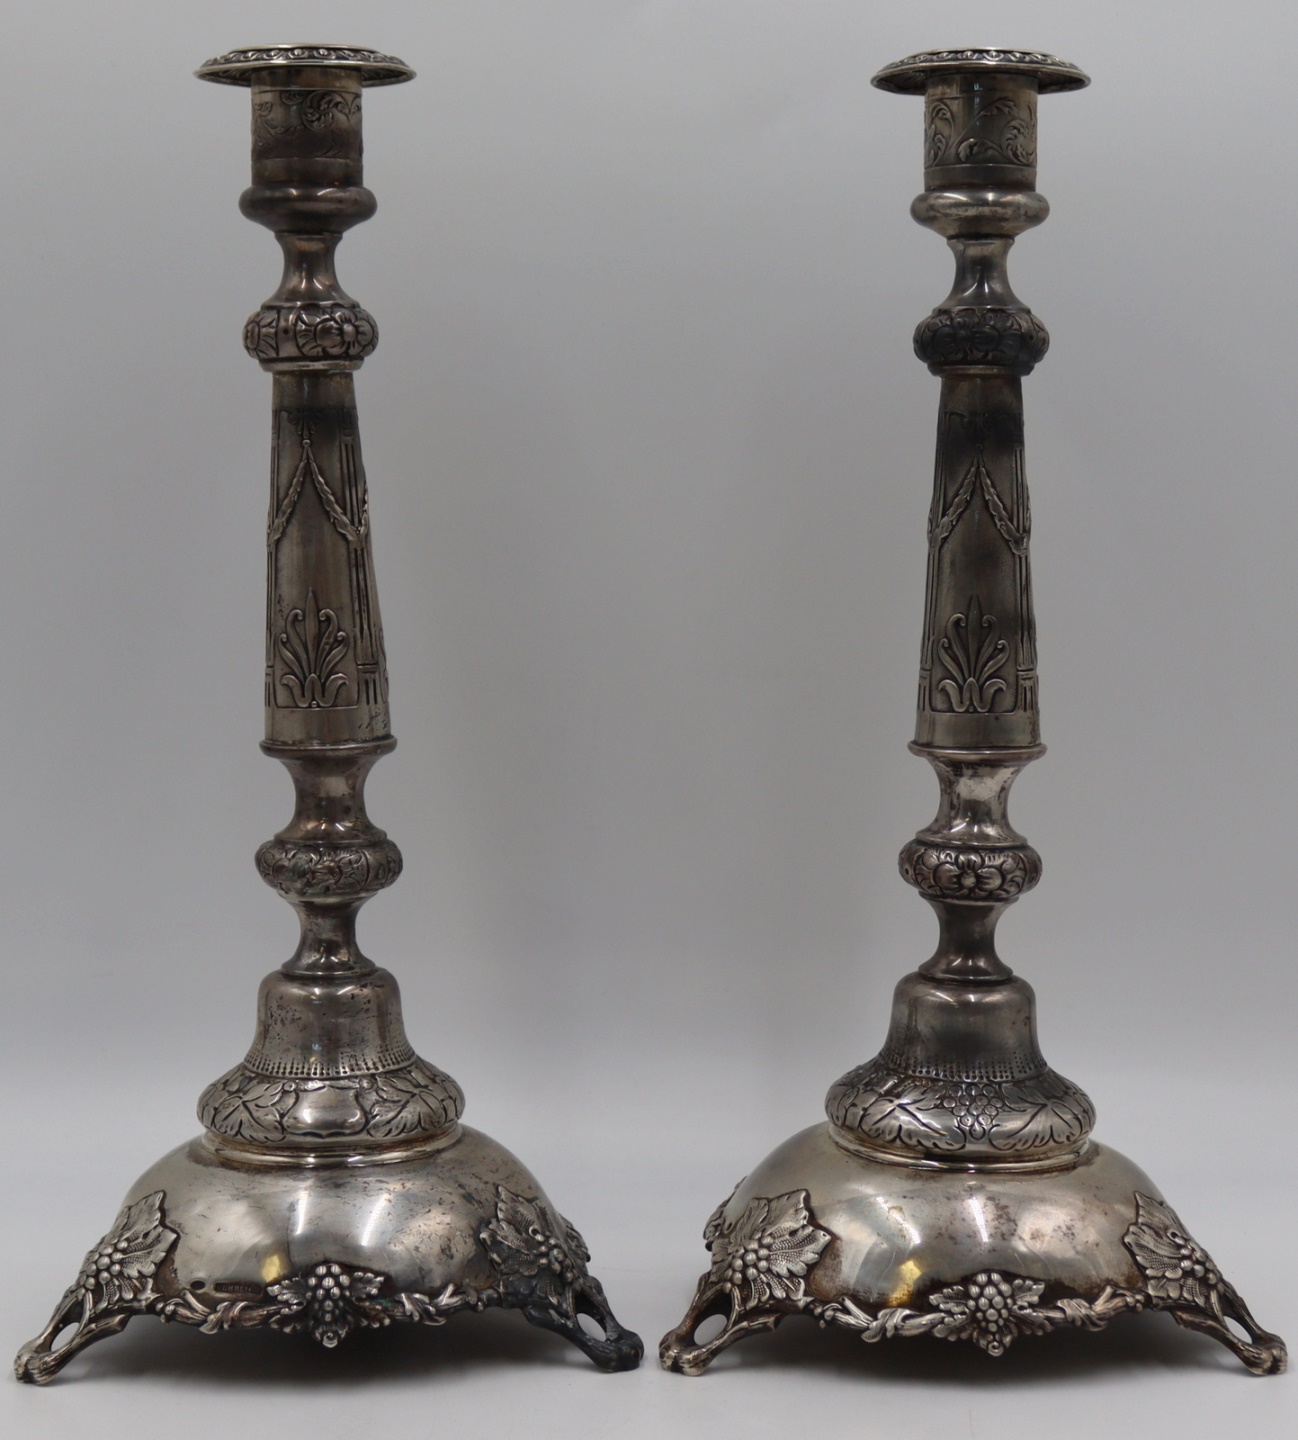 SILVER. PAIR OF 19TH C RUSSIAN